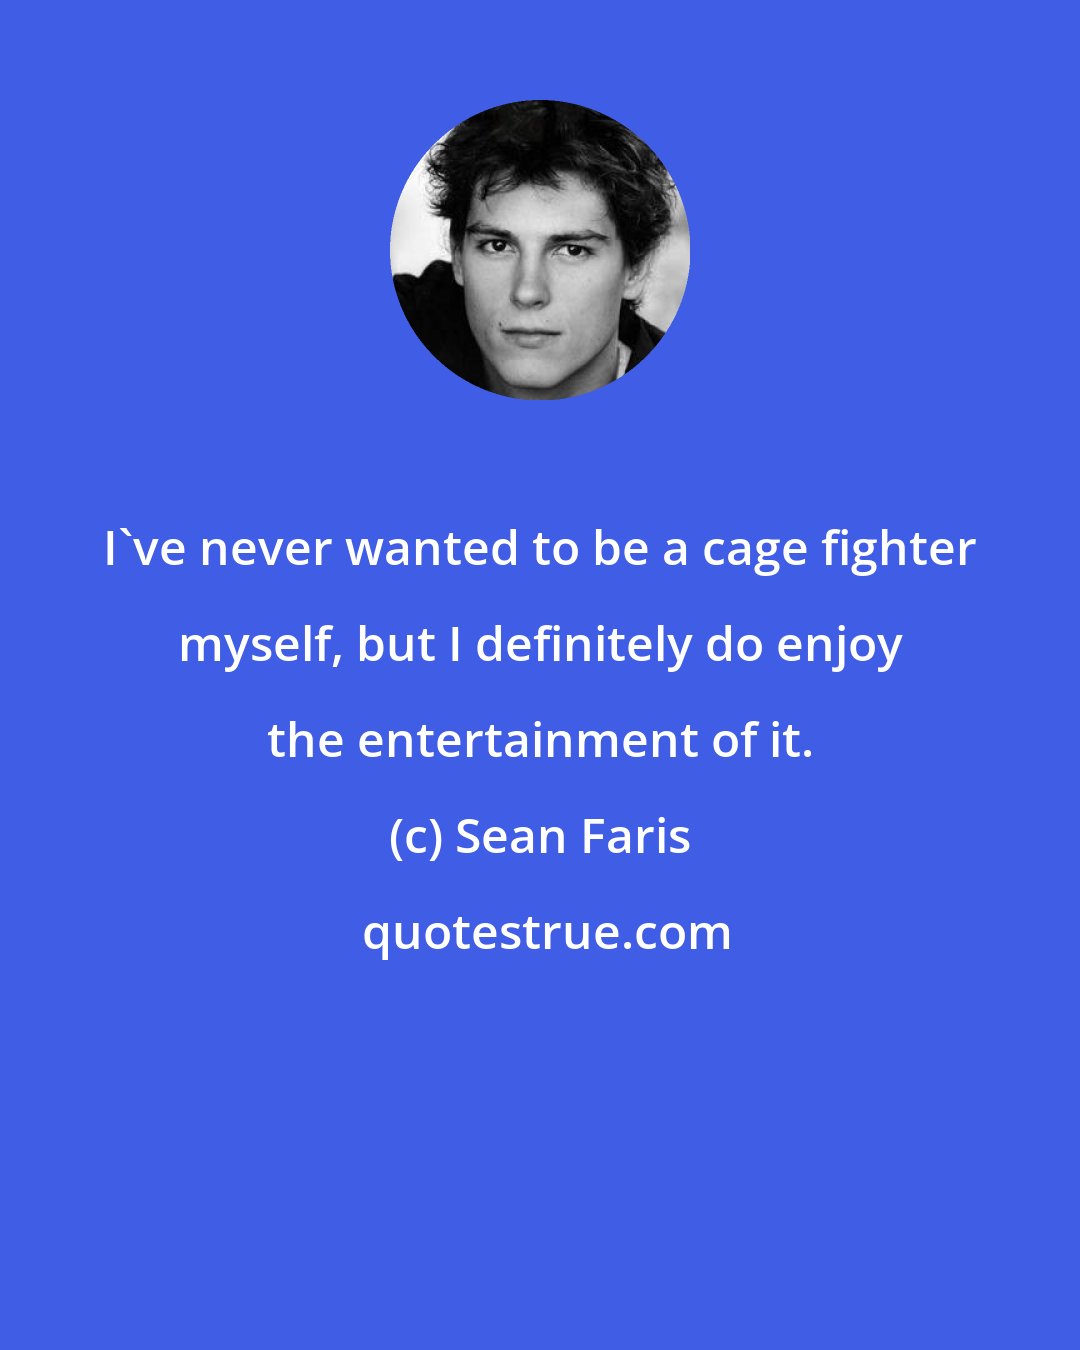 Sean Faris: I've never wanted to be a cage fighter myself, but I definitely do enjoy the entertainment of it.